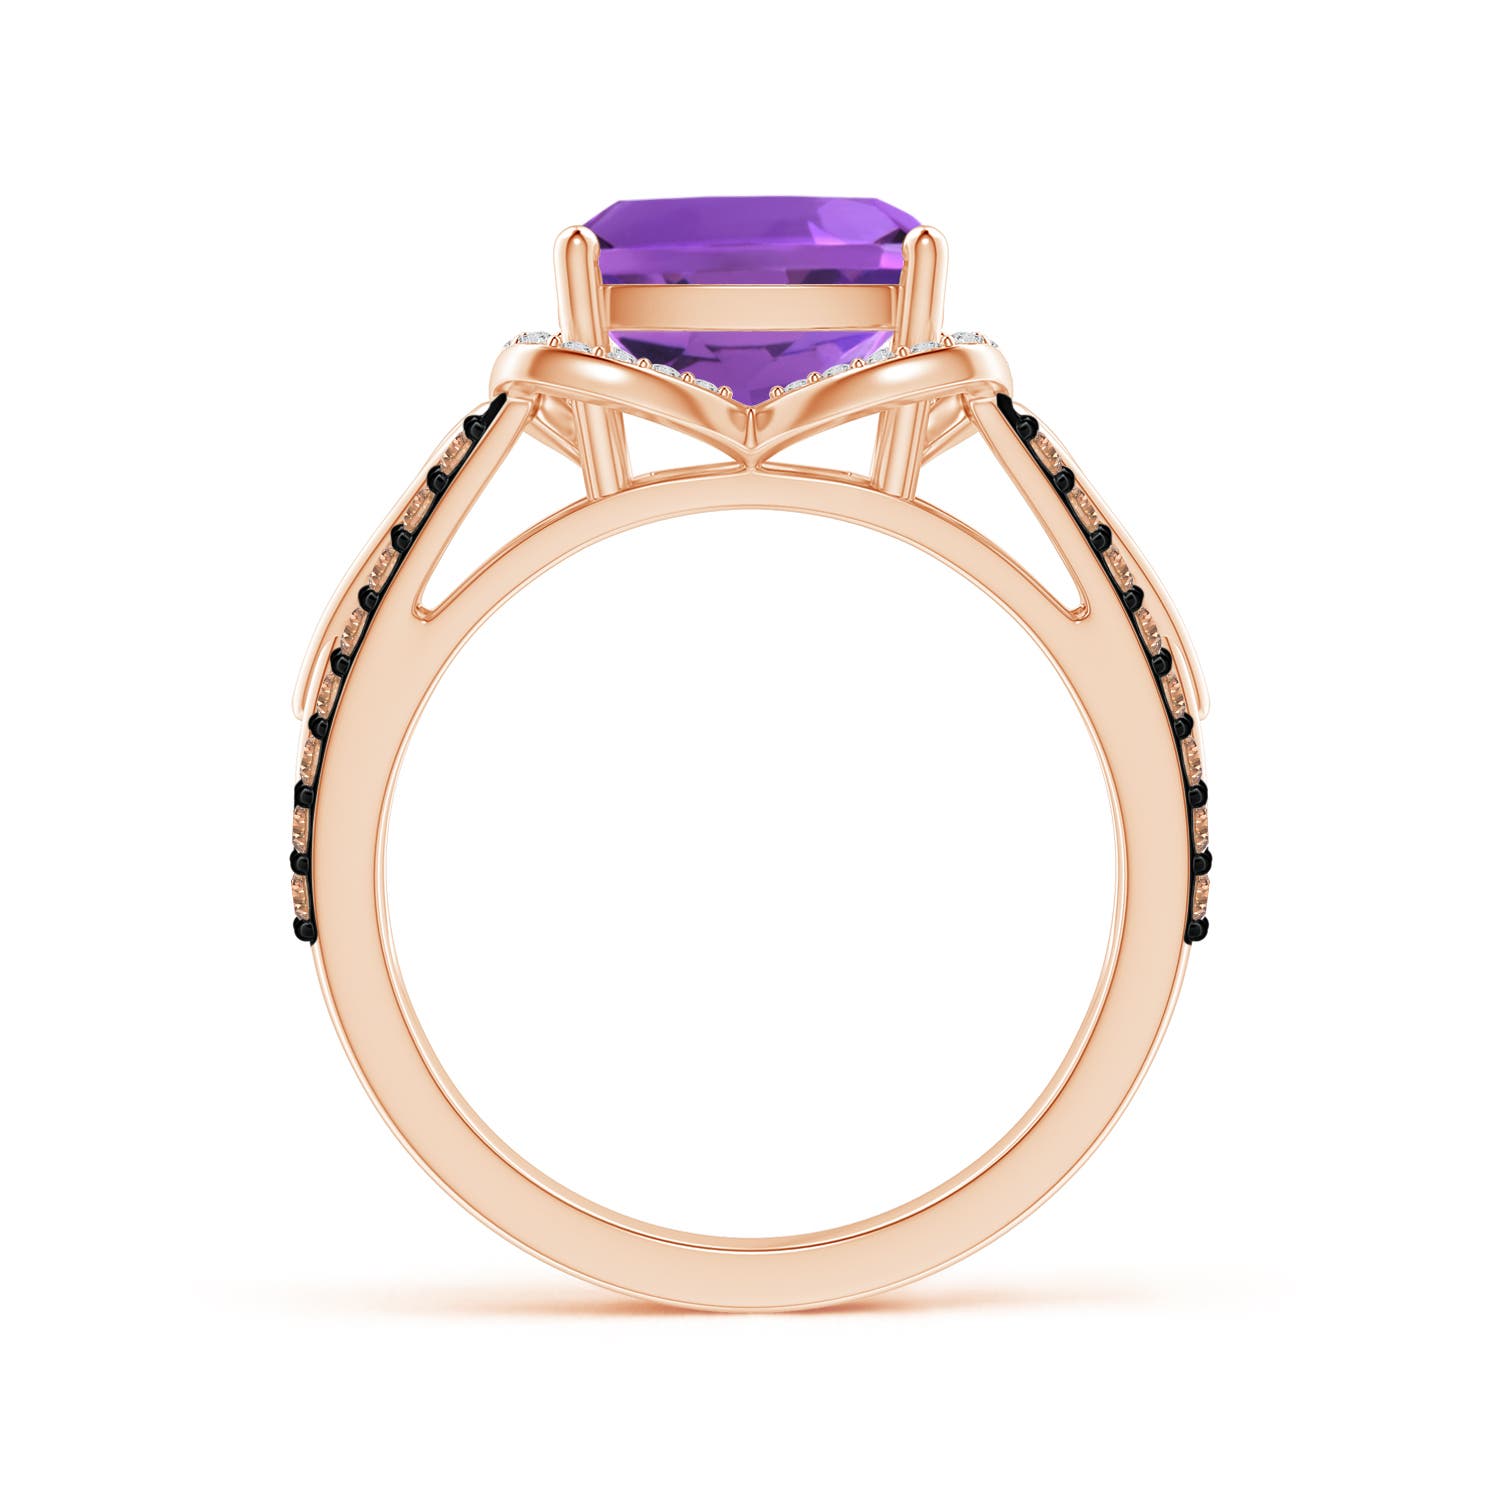 AAA - Amethyst / 3.61 CT / 14 KT Rose Gold